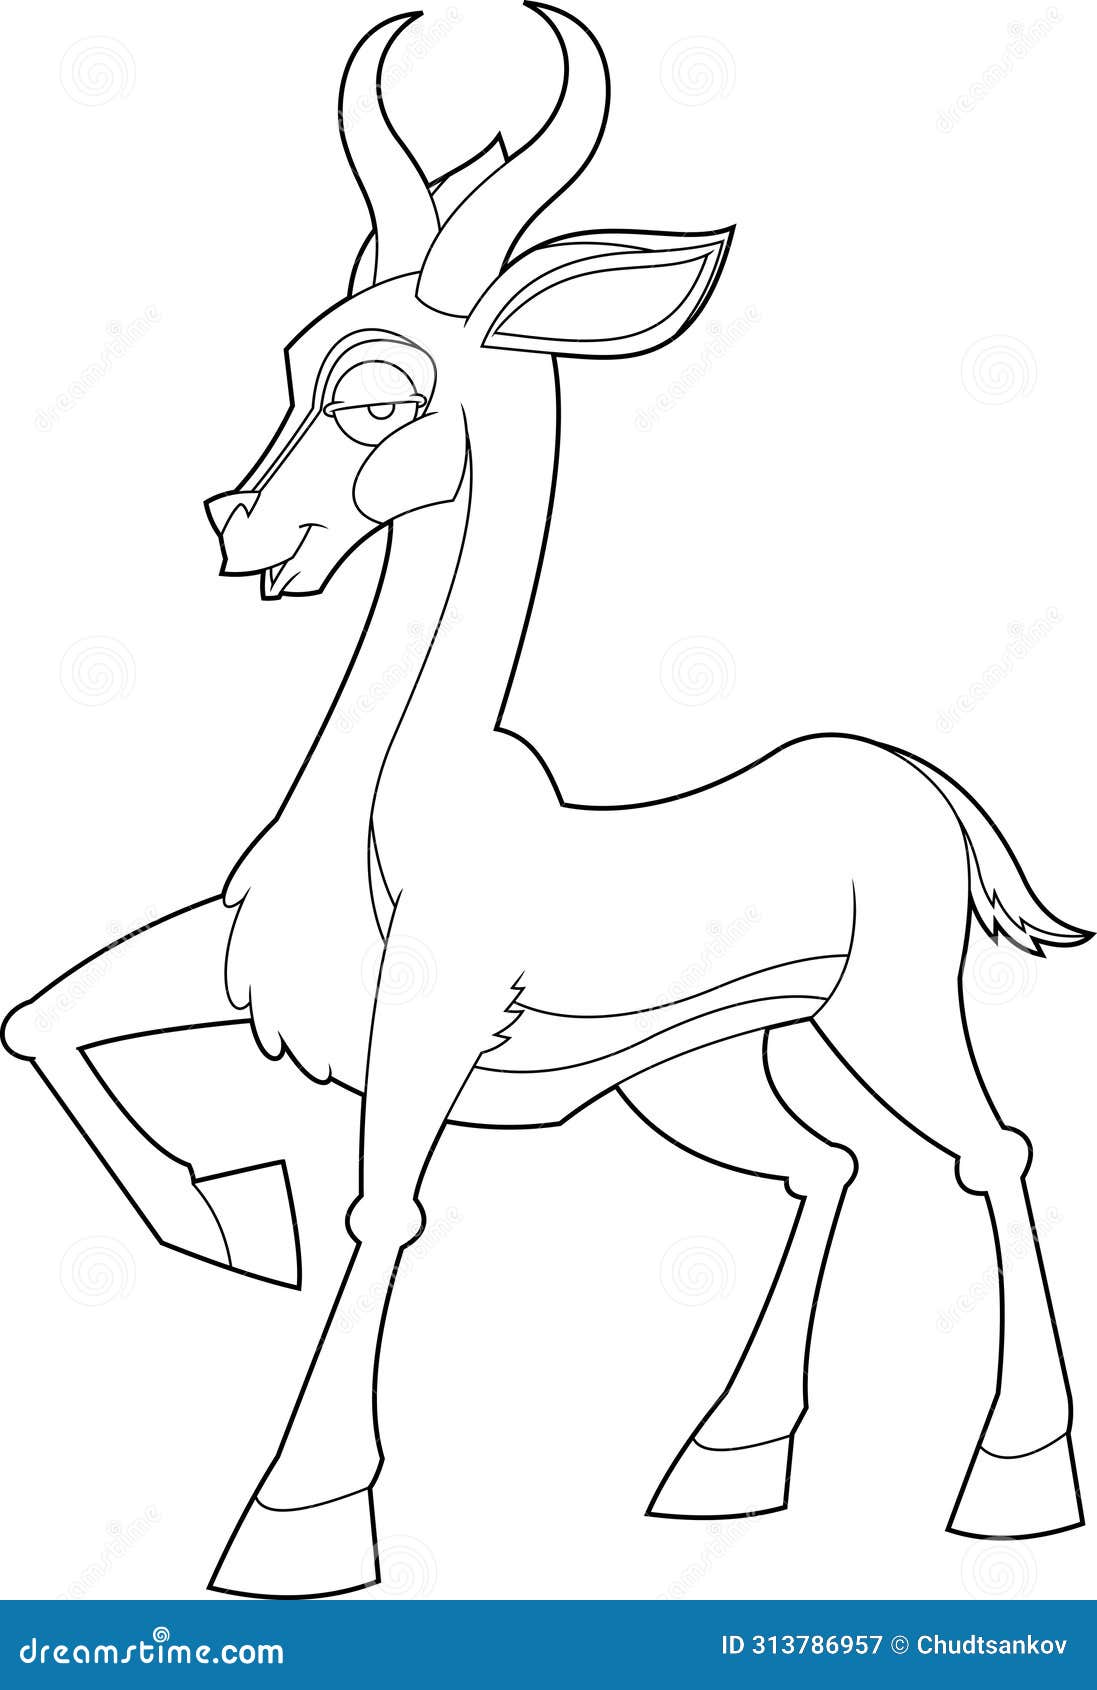 outlined springbok animal cartoon character